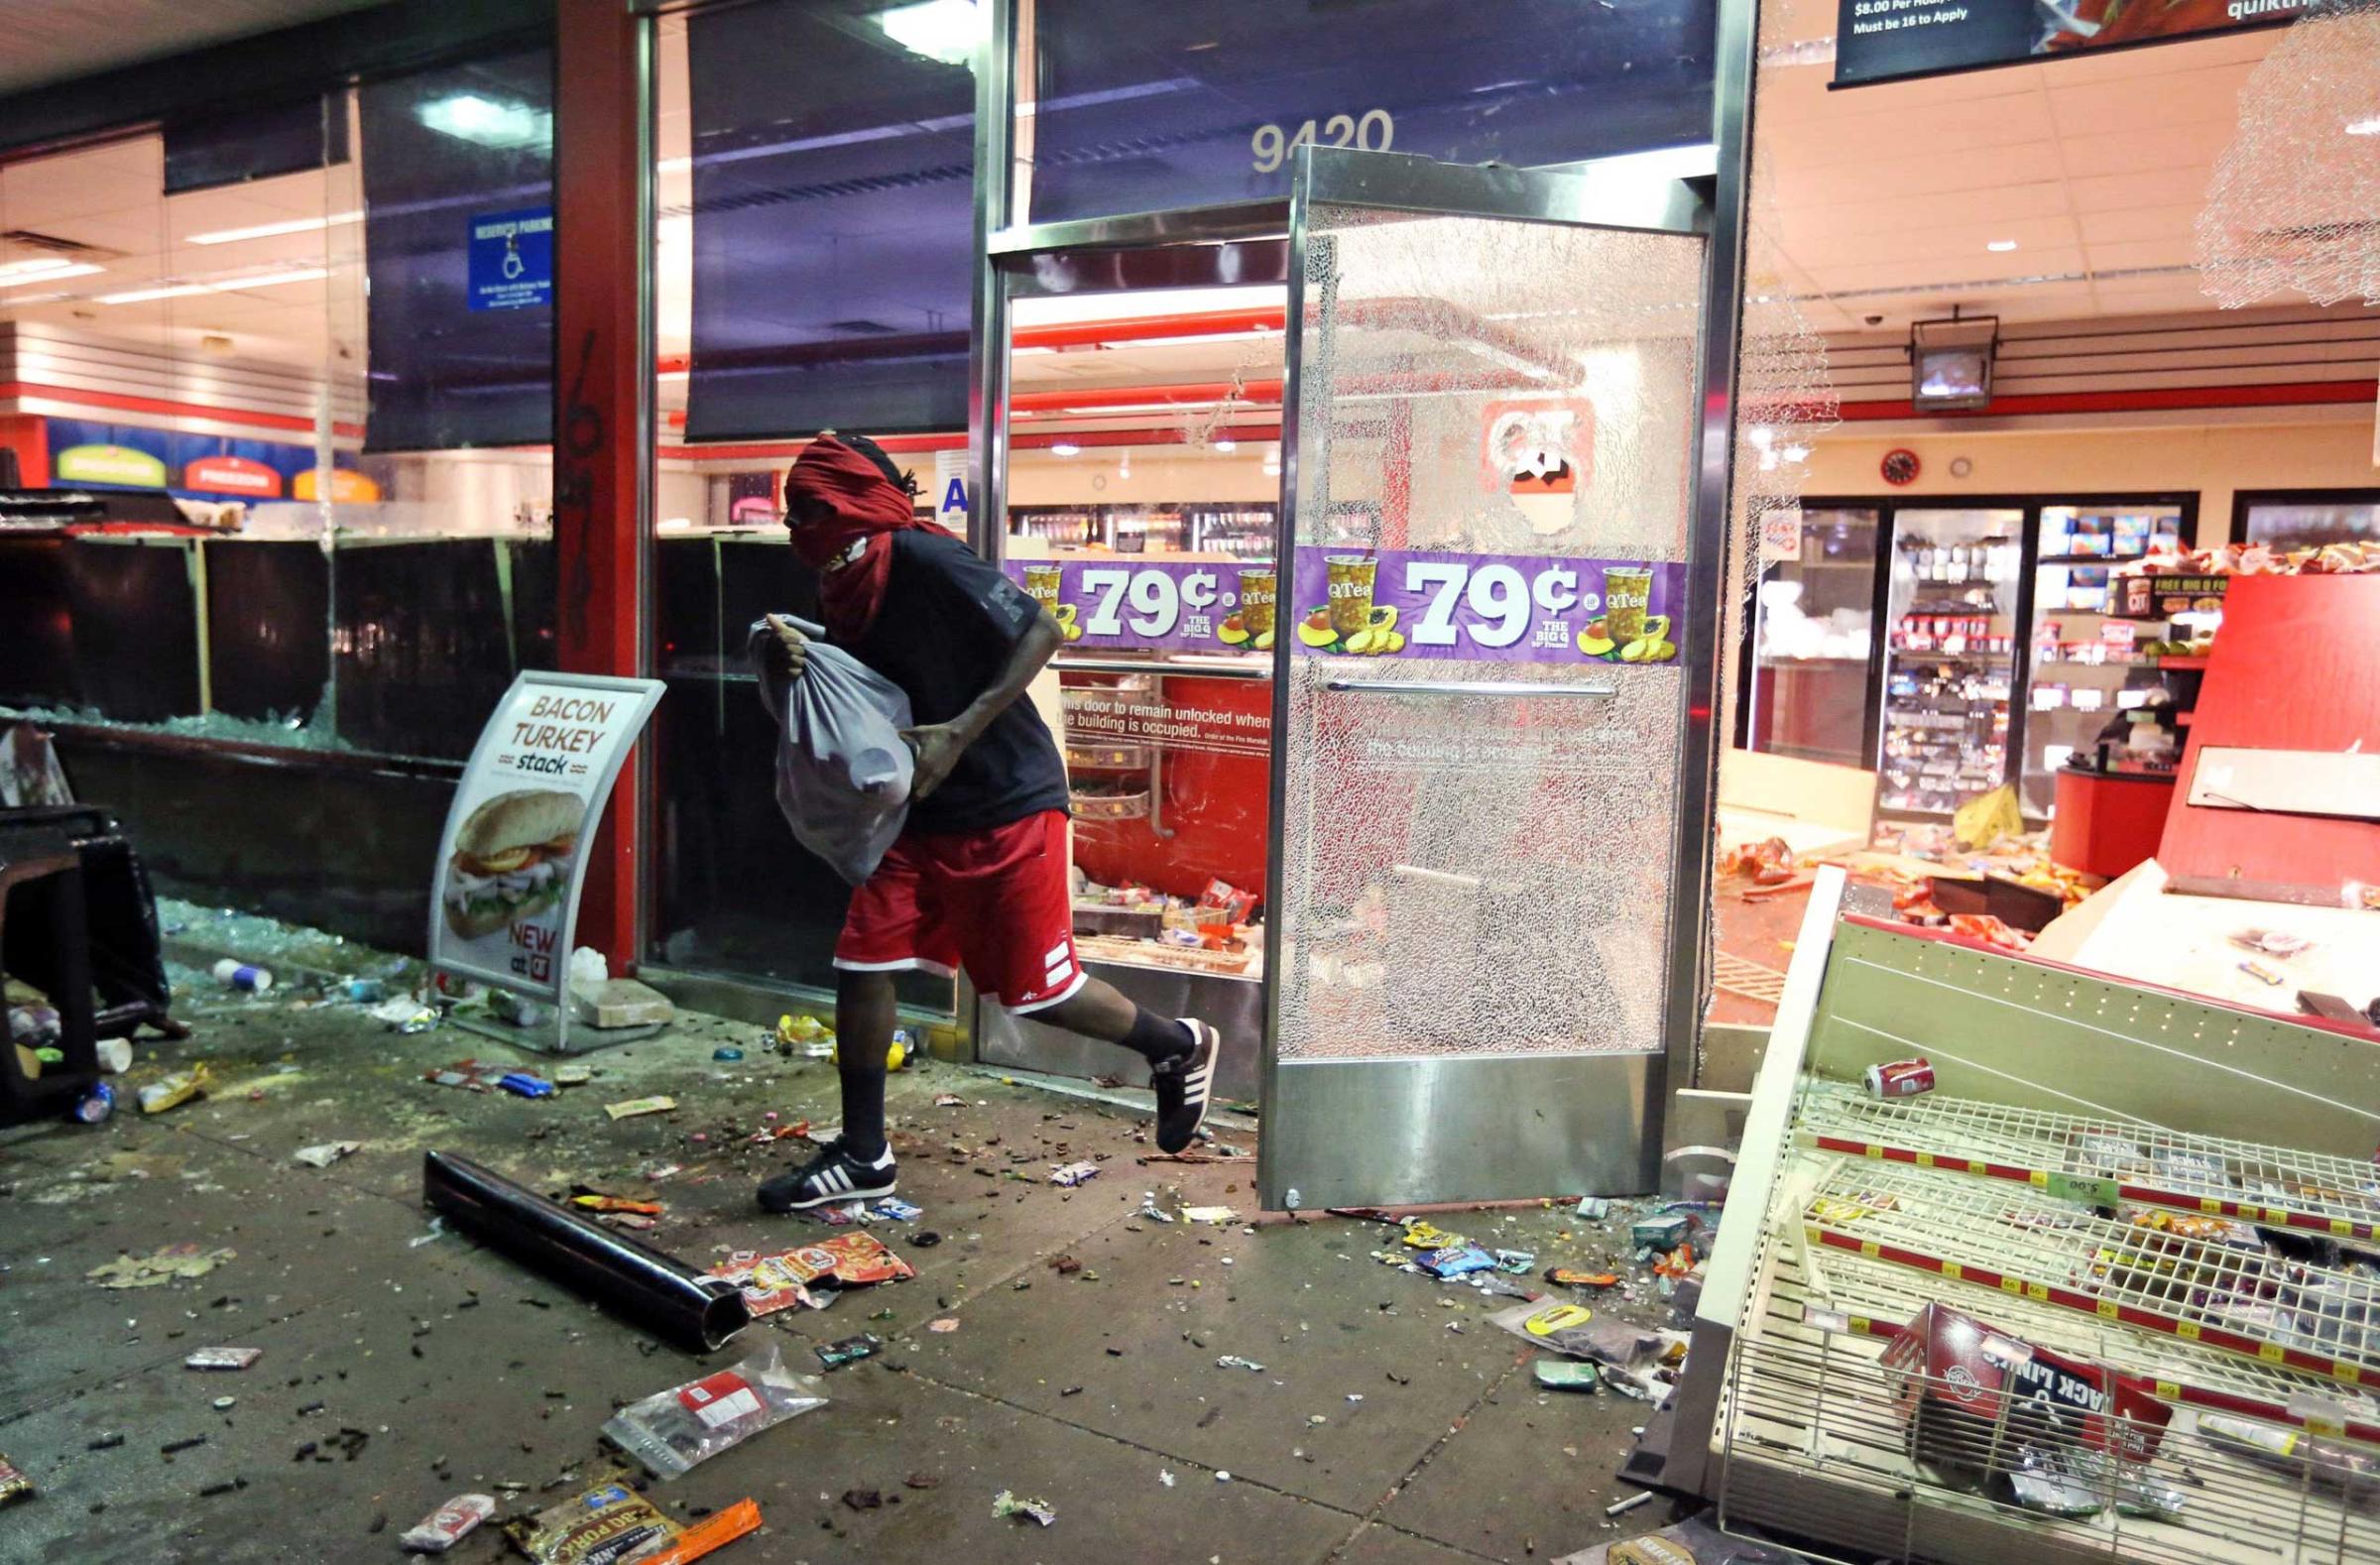 Aug. 10, 2014. A man leaves a store on Sunday, in Ferguson, Mo. A few thousand people crammed a suburban St. Louis street Sunday night at a vigil for unarmed 18-year-old Michael Brown who was shot and killed by a police officer, while afterward several car windows were smashed and stores were looted as people carried away armloads of goods as witnessed by an an Associated Press reporter.